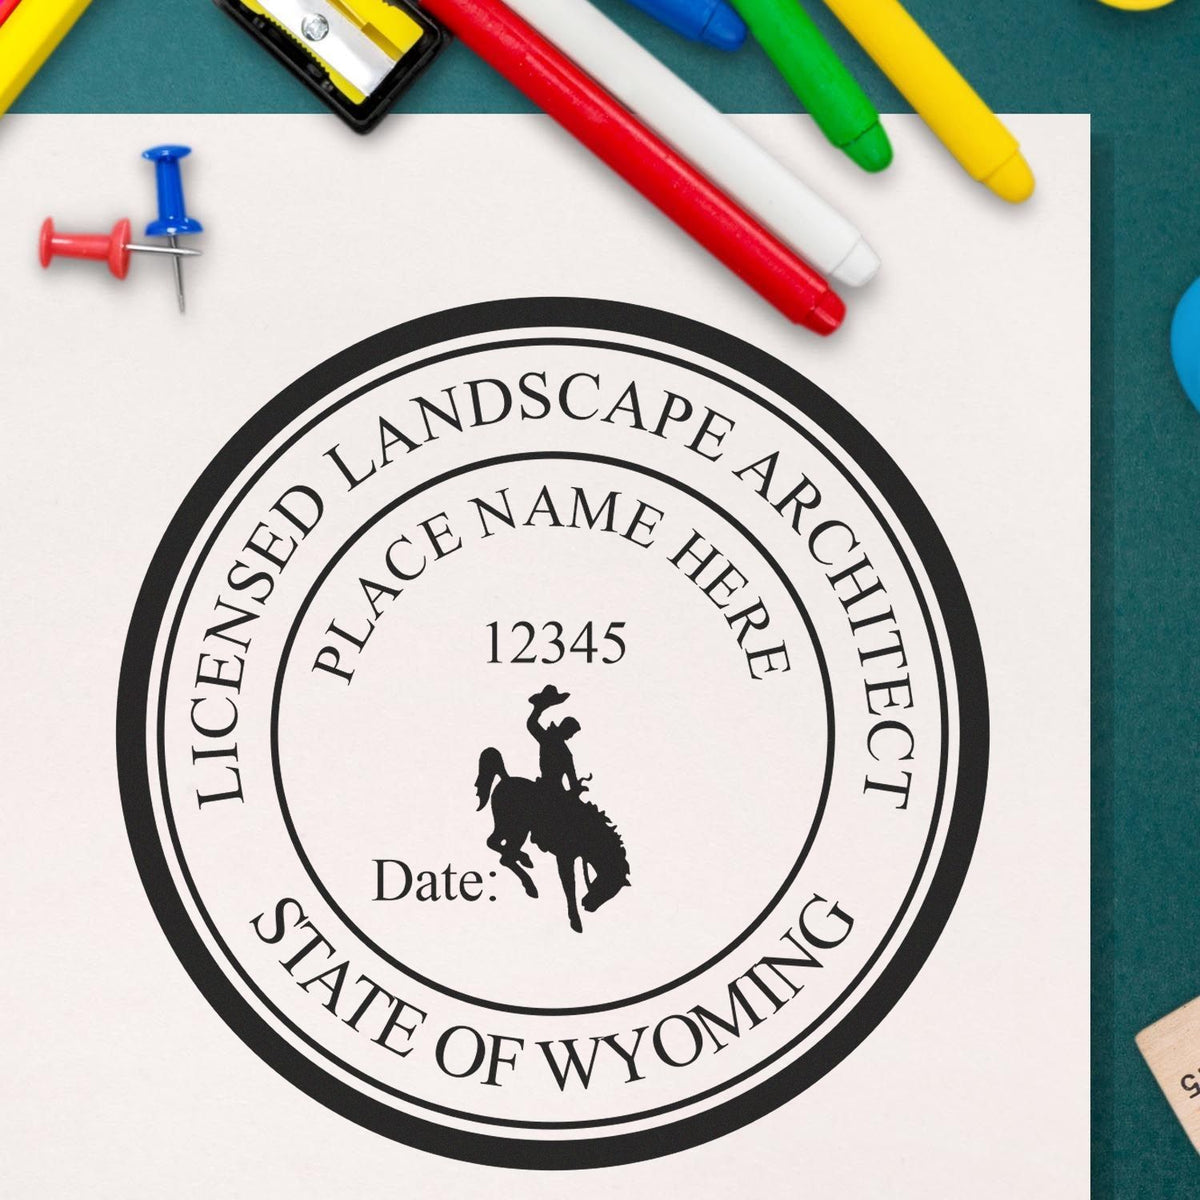 This paper is stamped with a sample imprint of the Premium MaxLight Pre-Inked Wyoming Landscape Architectural Stamp, signifying its quality and reliability.